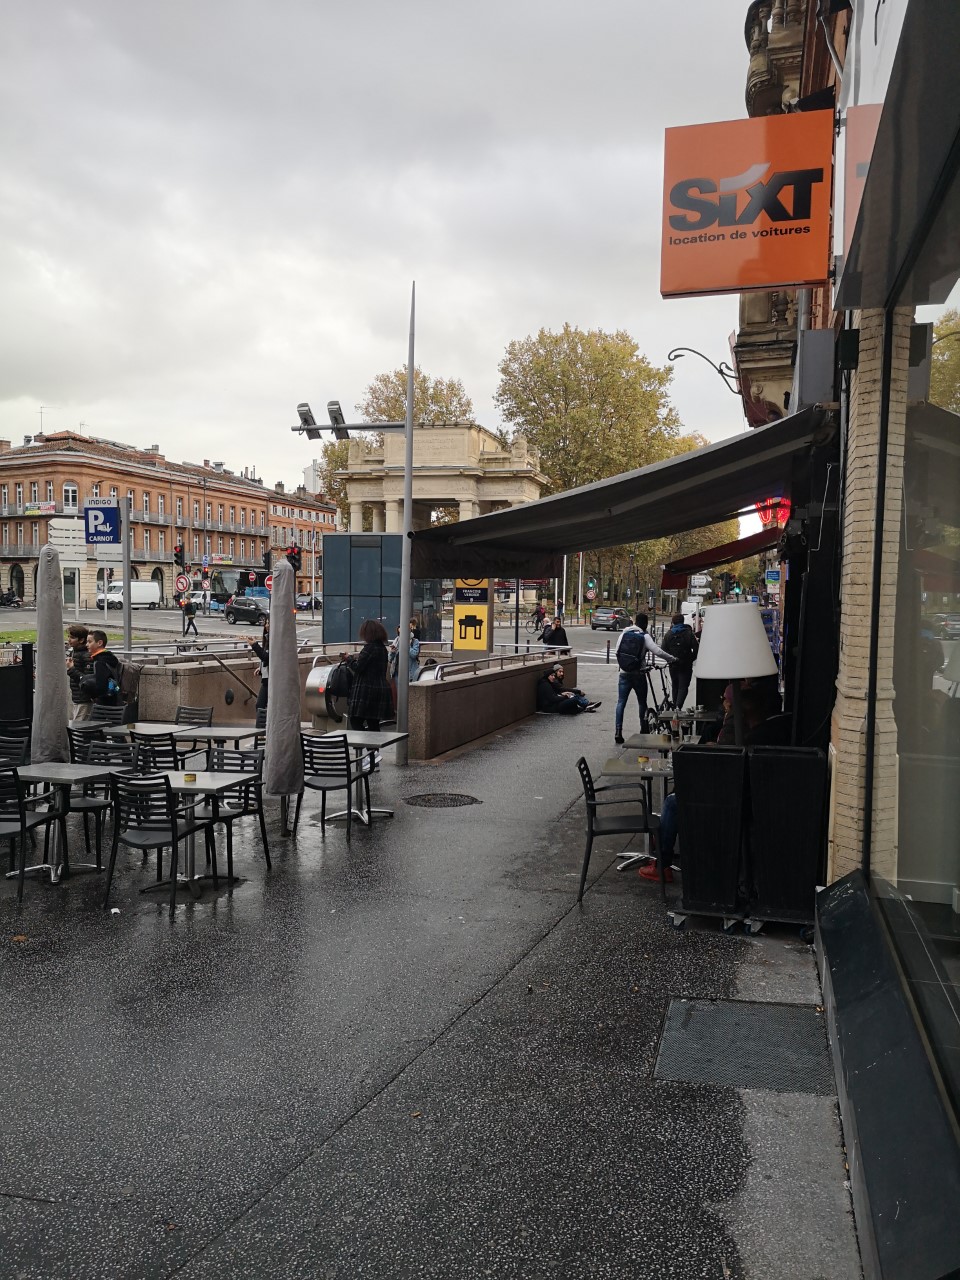 Images SIXT | Location voiture Toulouse